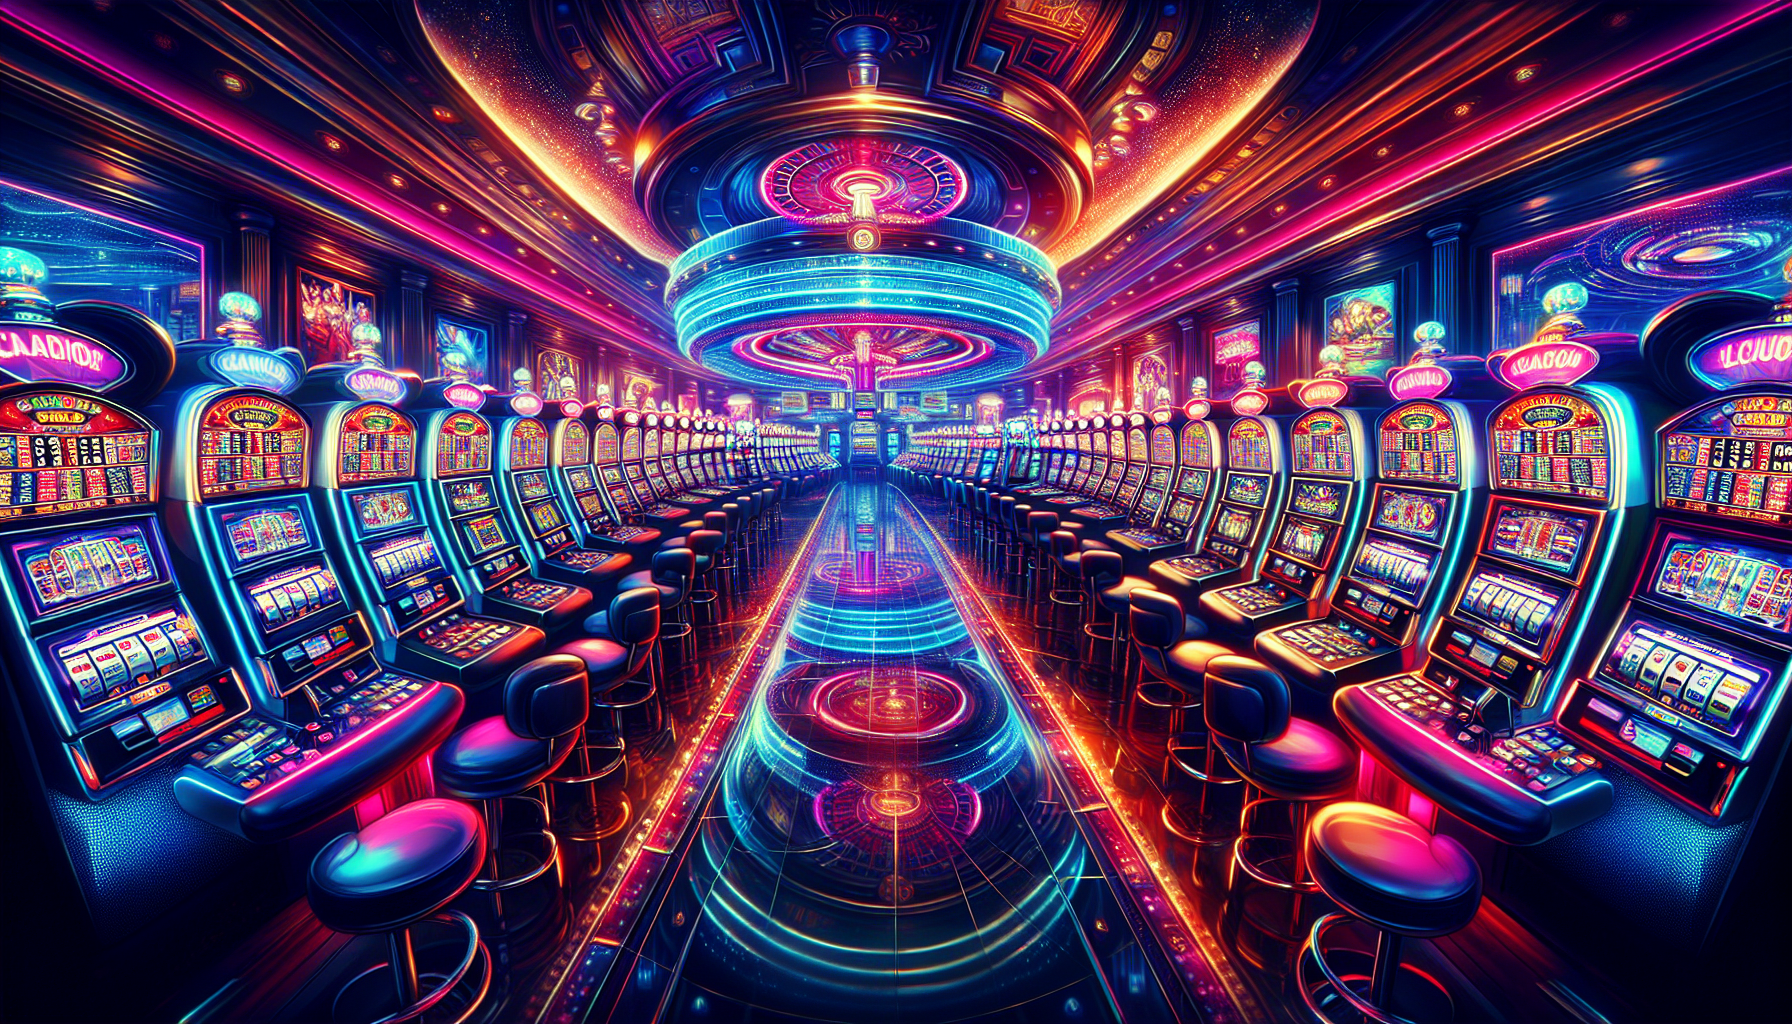 Illustration of a casino with neon lights and slot machines